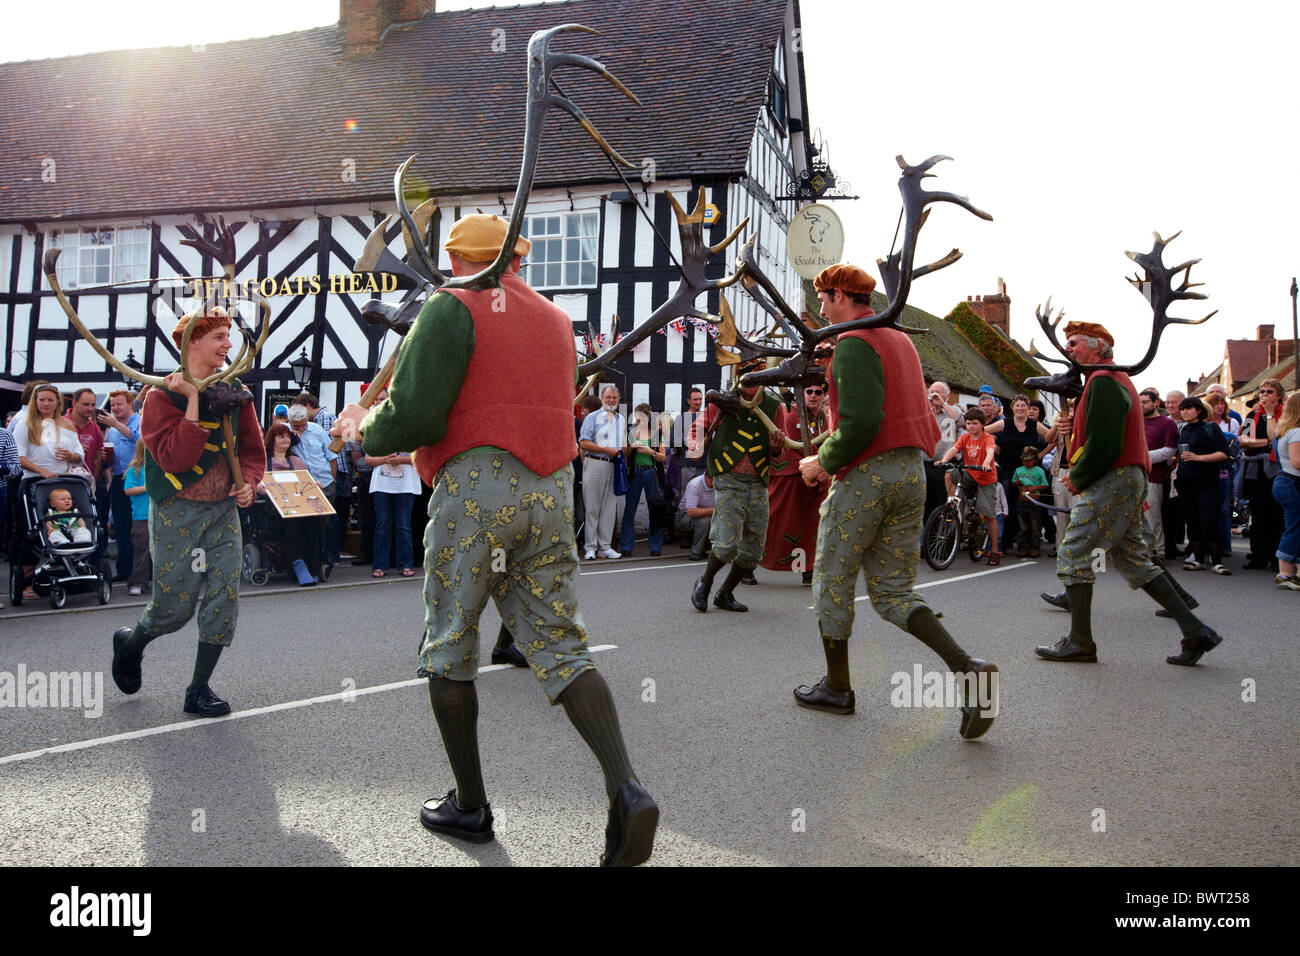 Horn Dancers The Abbots Bromley Horn Dance Staffordshire UK Europe Stock Photo